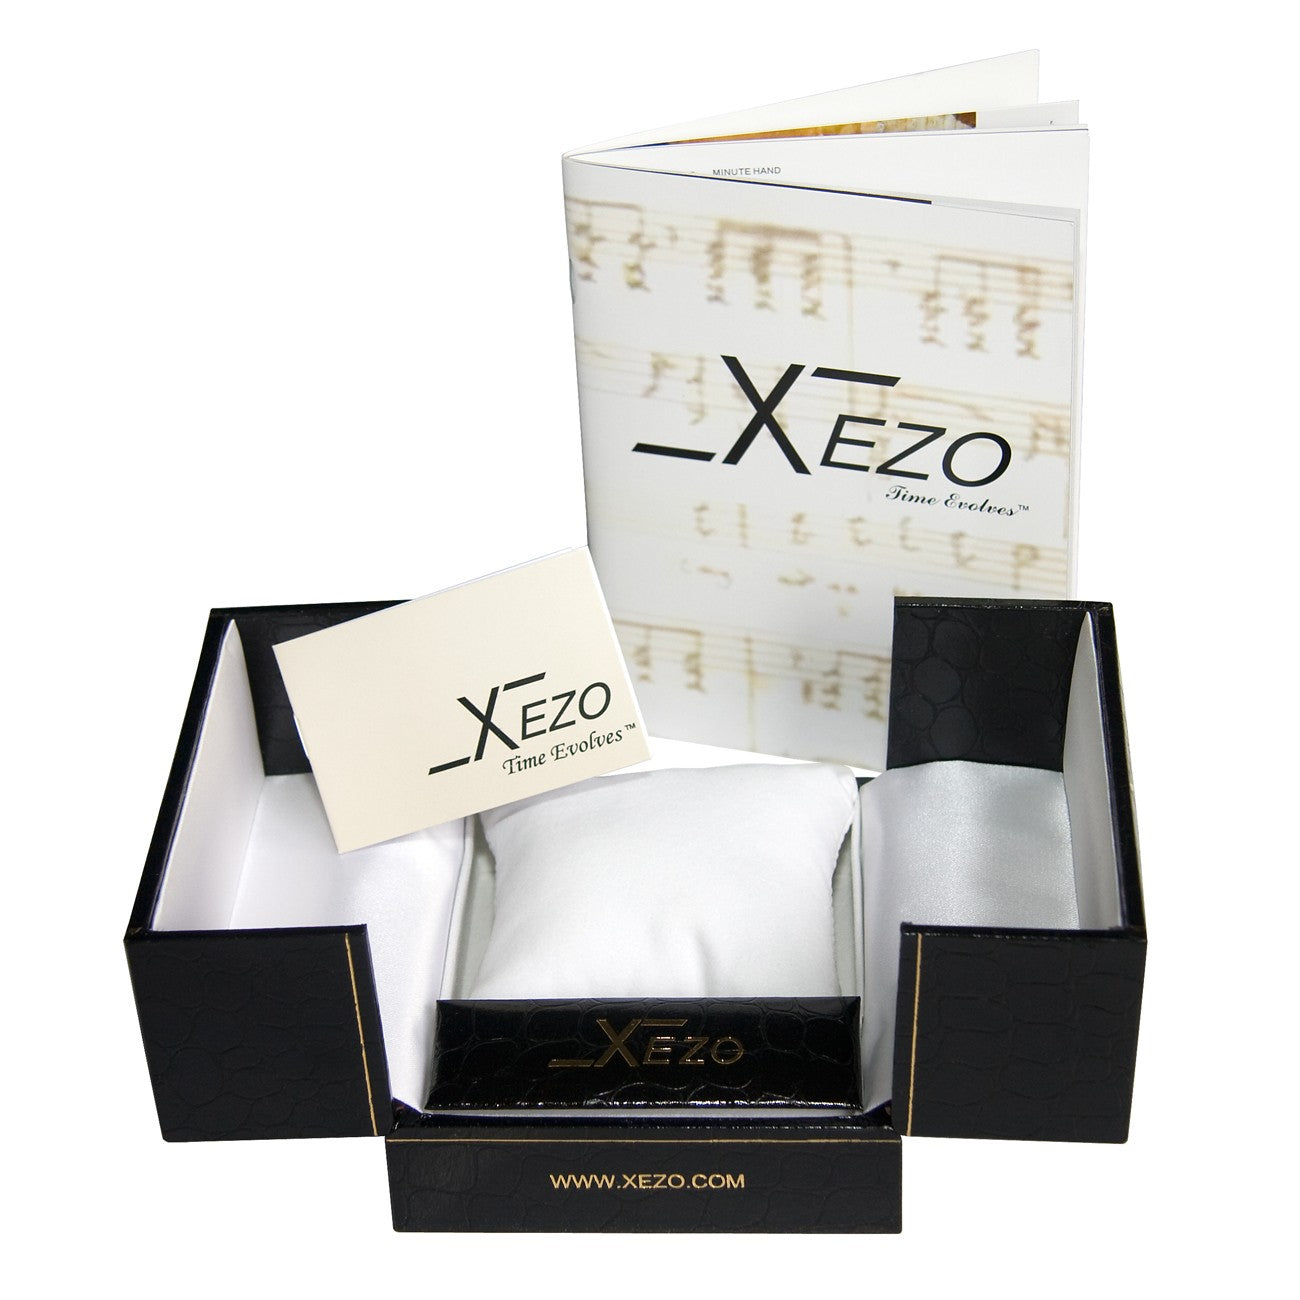 Xezo - Black gift box, certificate, and manual of the Air Commando D45-SR watch